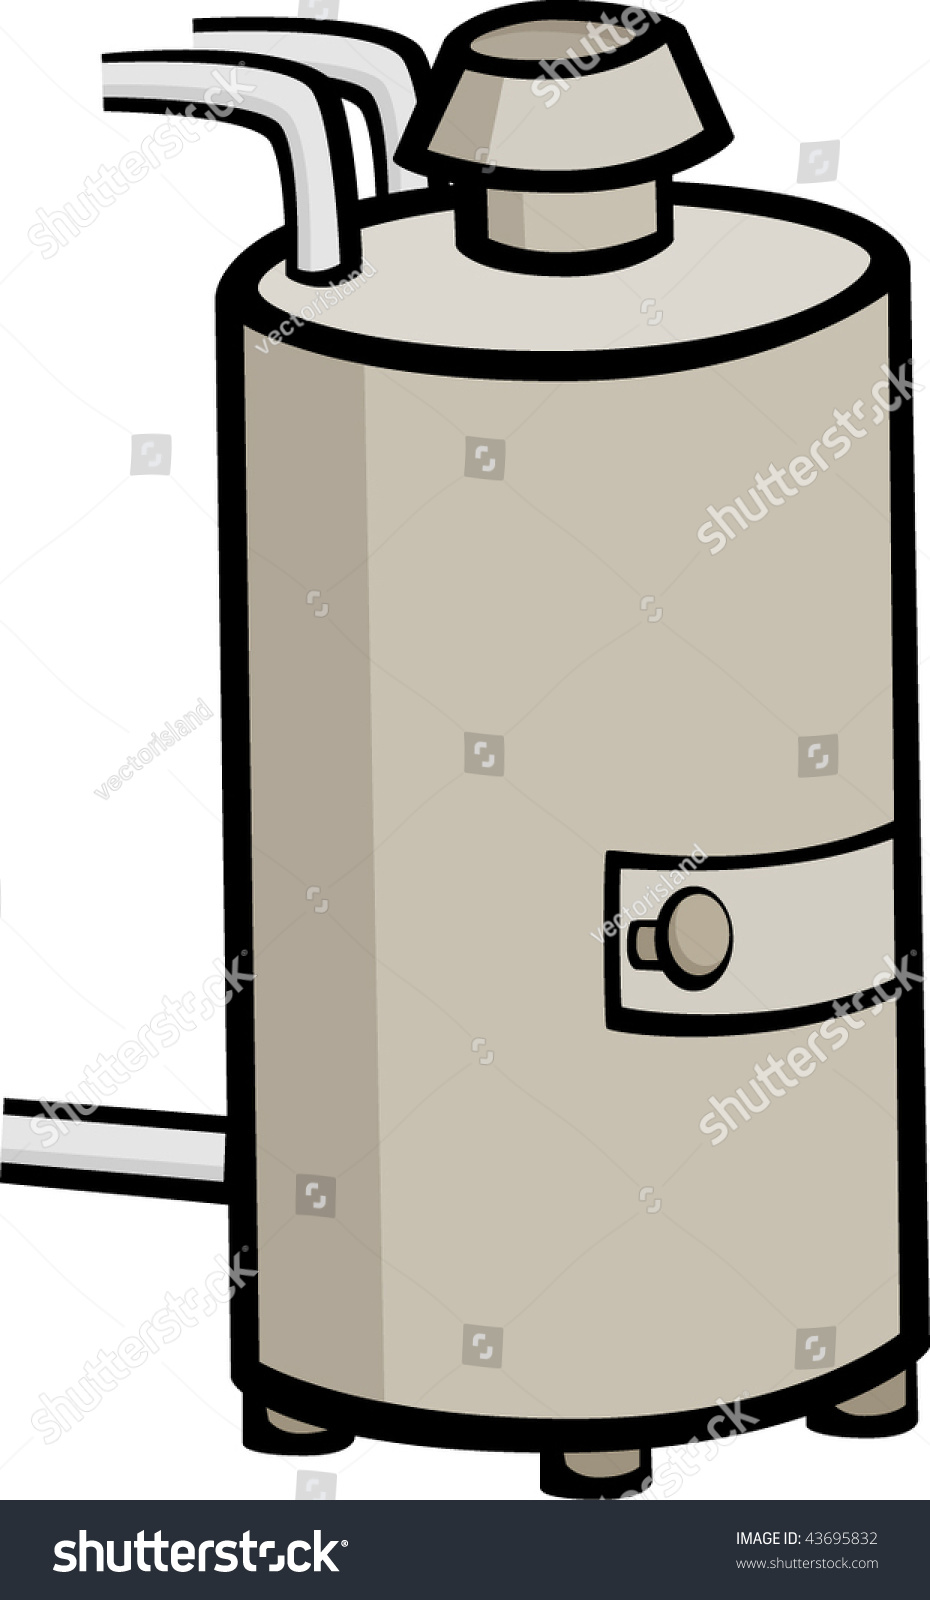 clipart water heater - photo #7